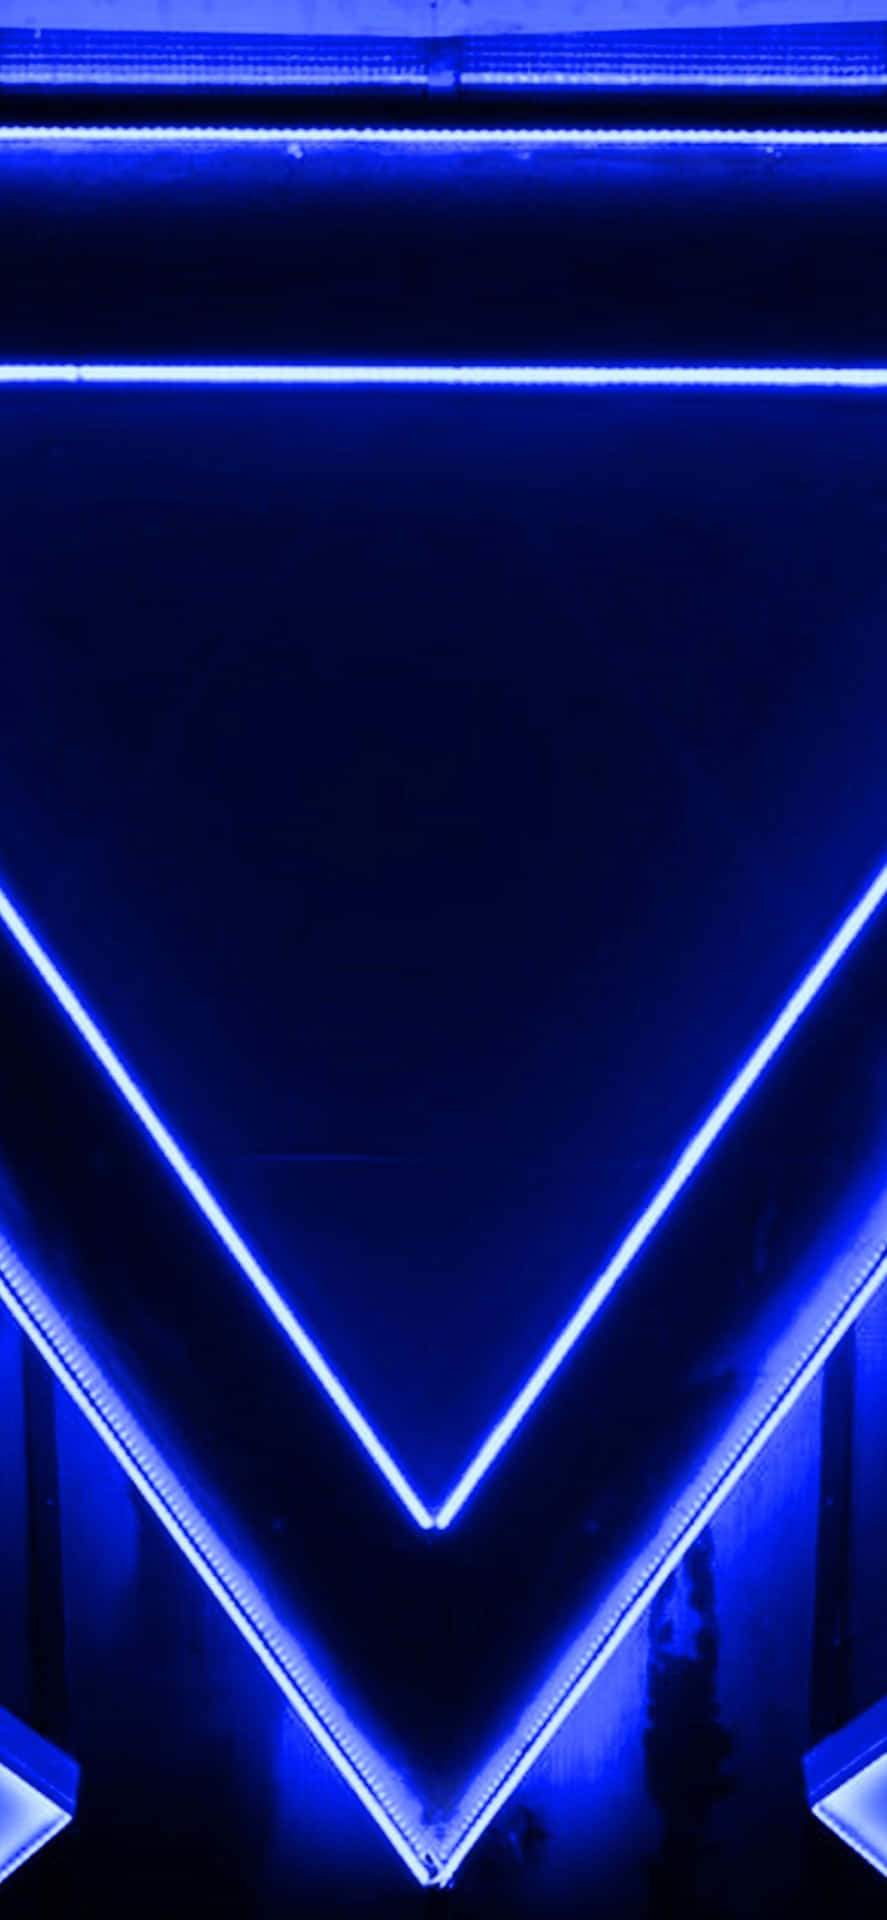 A Blue Triangle With A Light On It